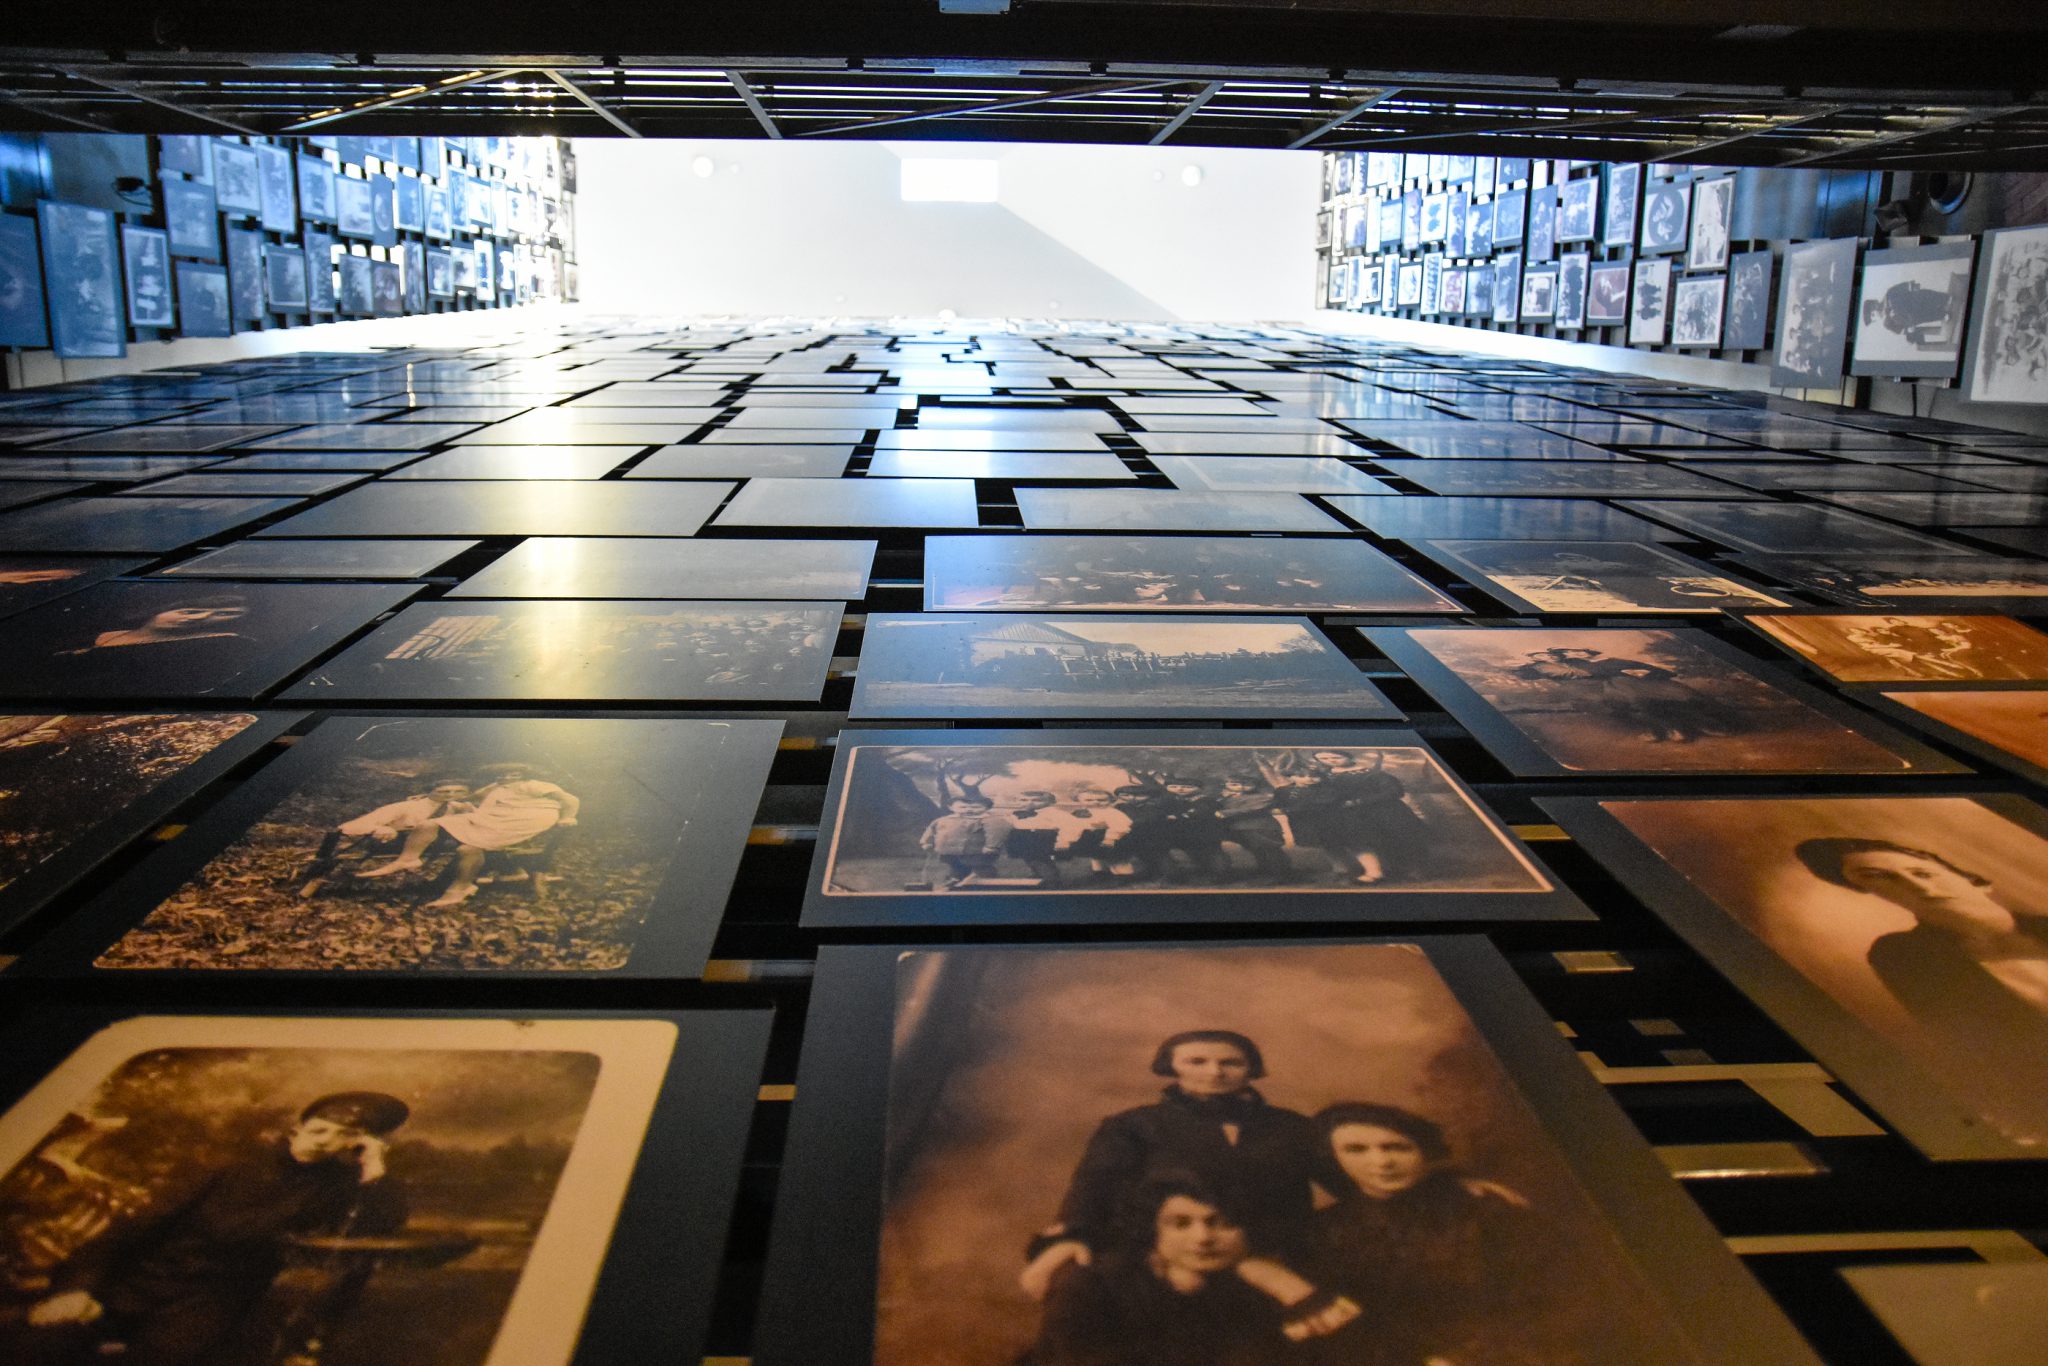 Washington DC, - Dec. 19: Internal view of the Holocaust Memorial Museum. Real pictures of the deported Jews, Nazi propaganda, territory of conquest. Shot at December 19, 2015 in Washington DC, USA.